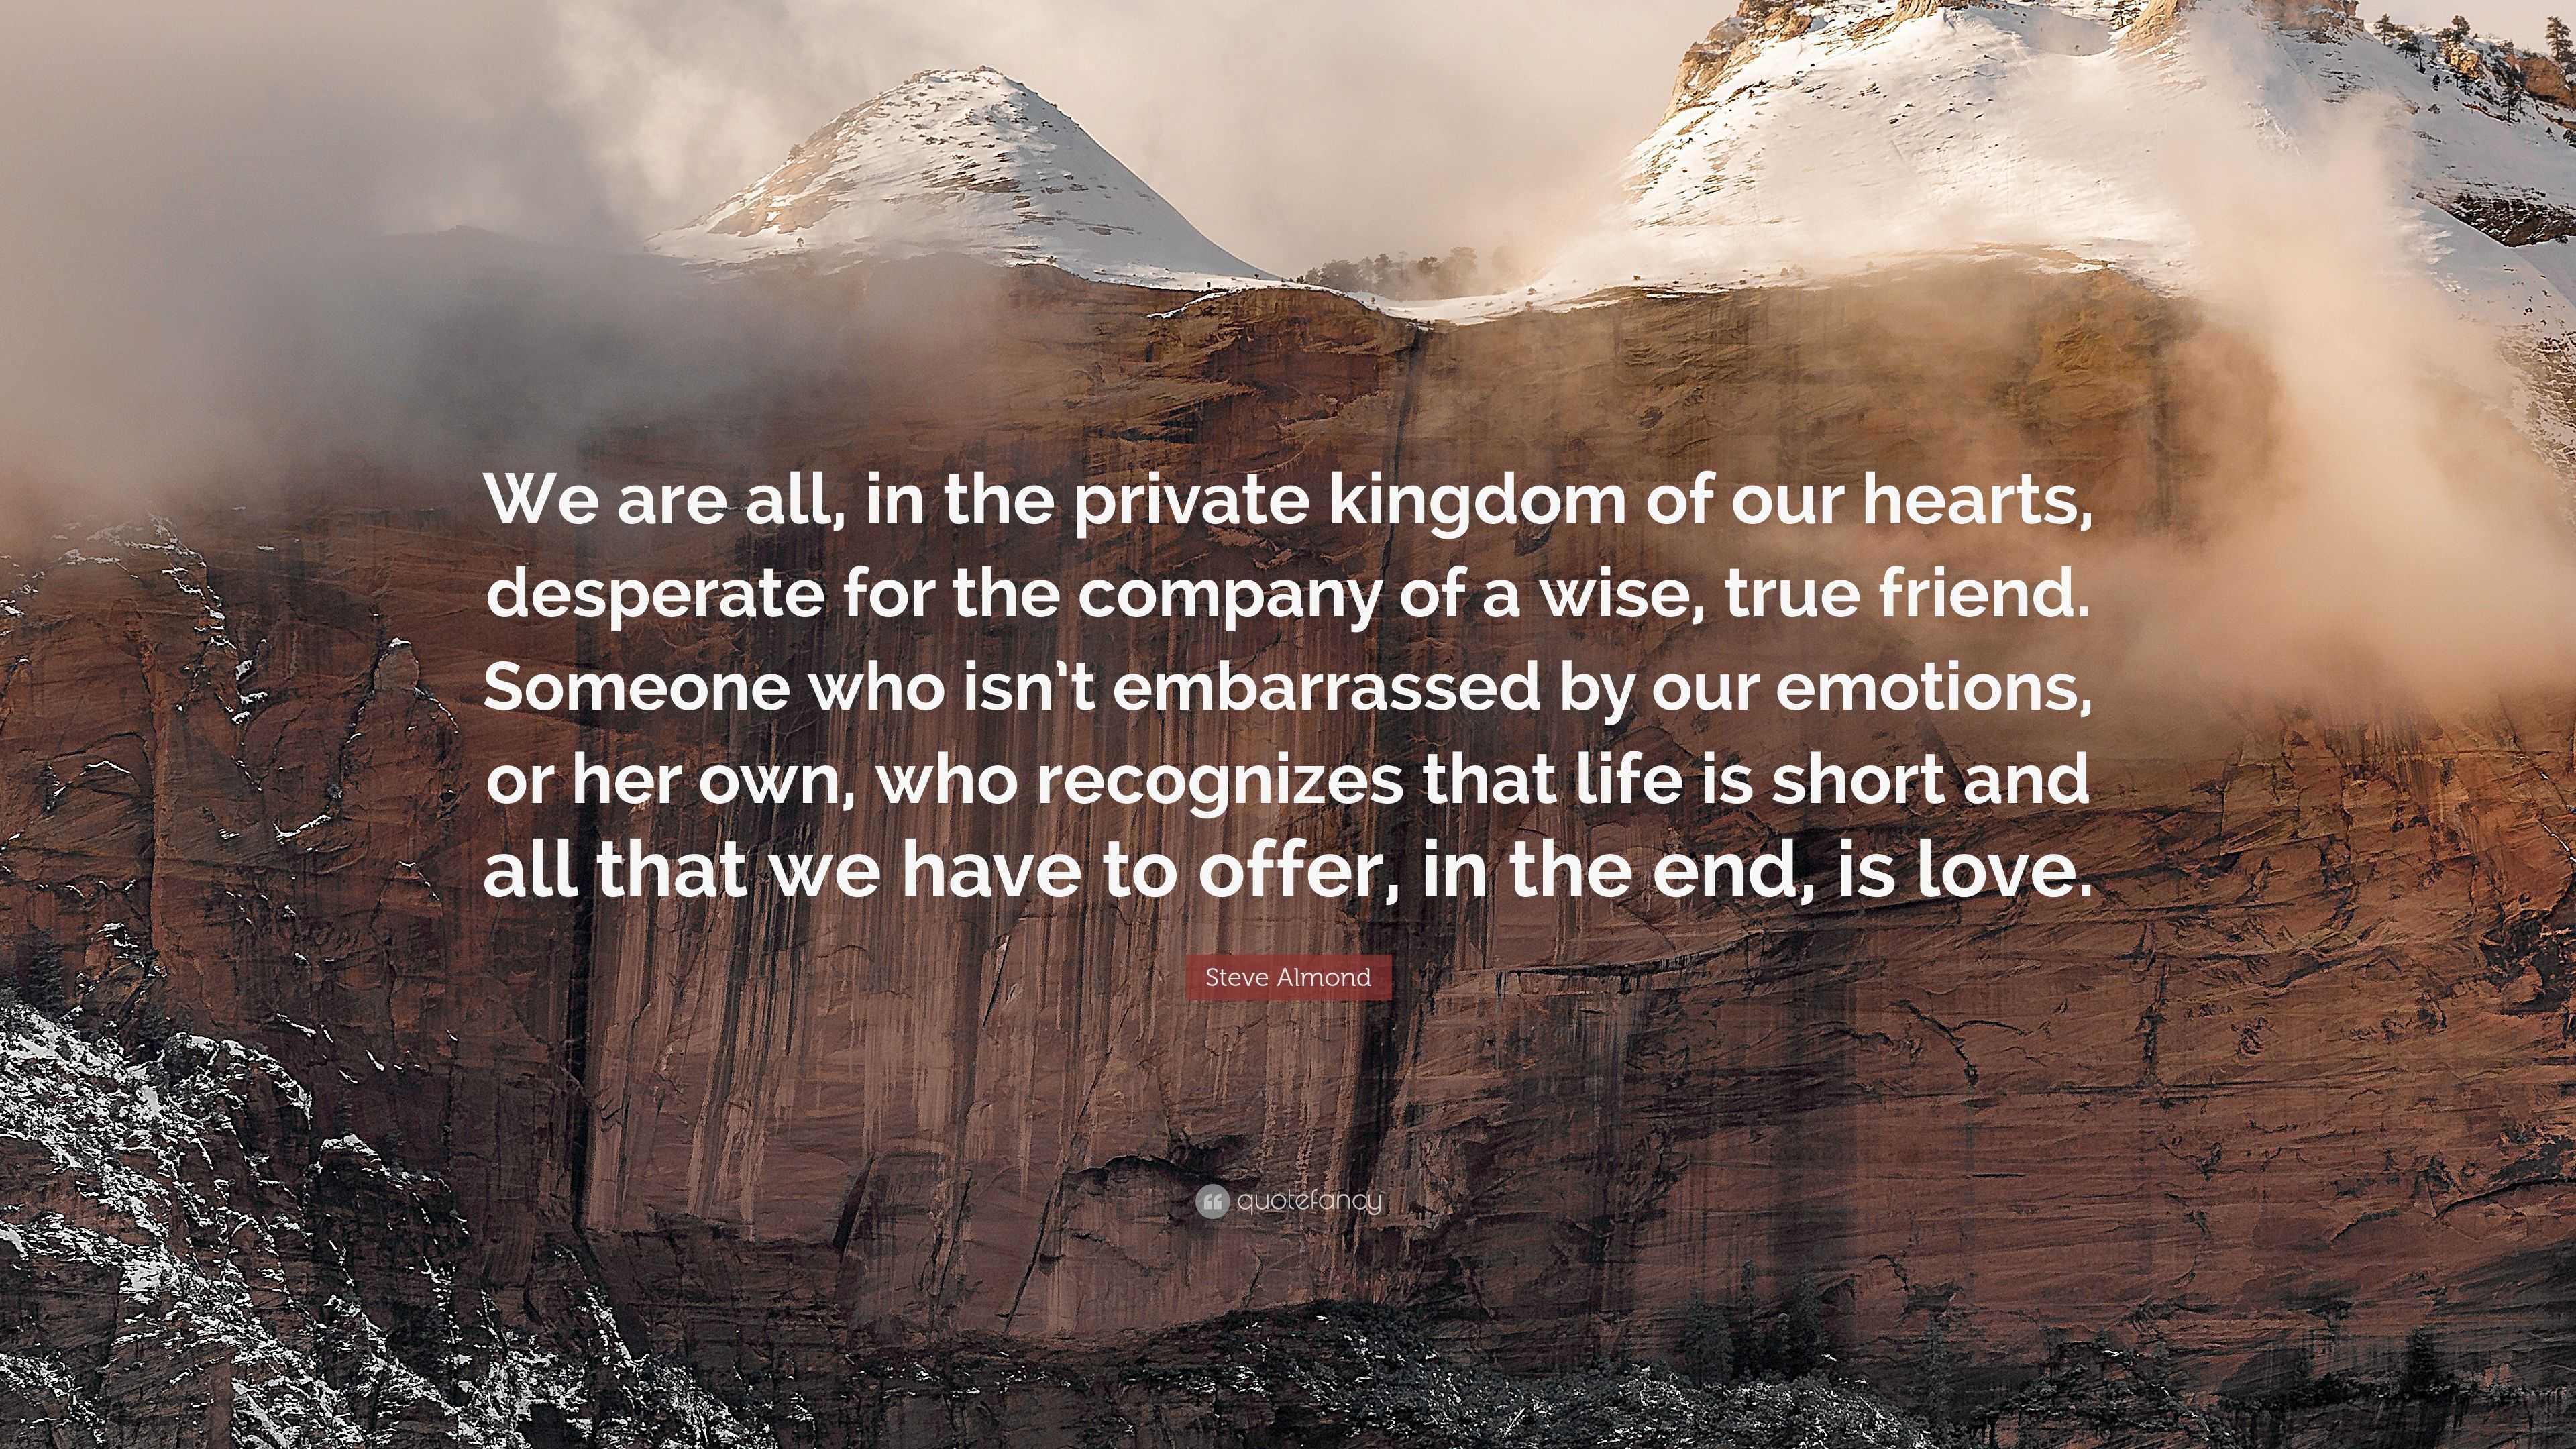 Our Kingdom - Love Quotes